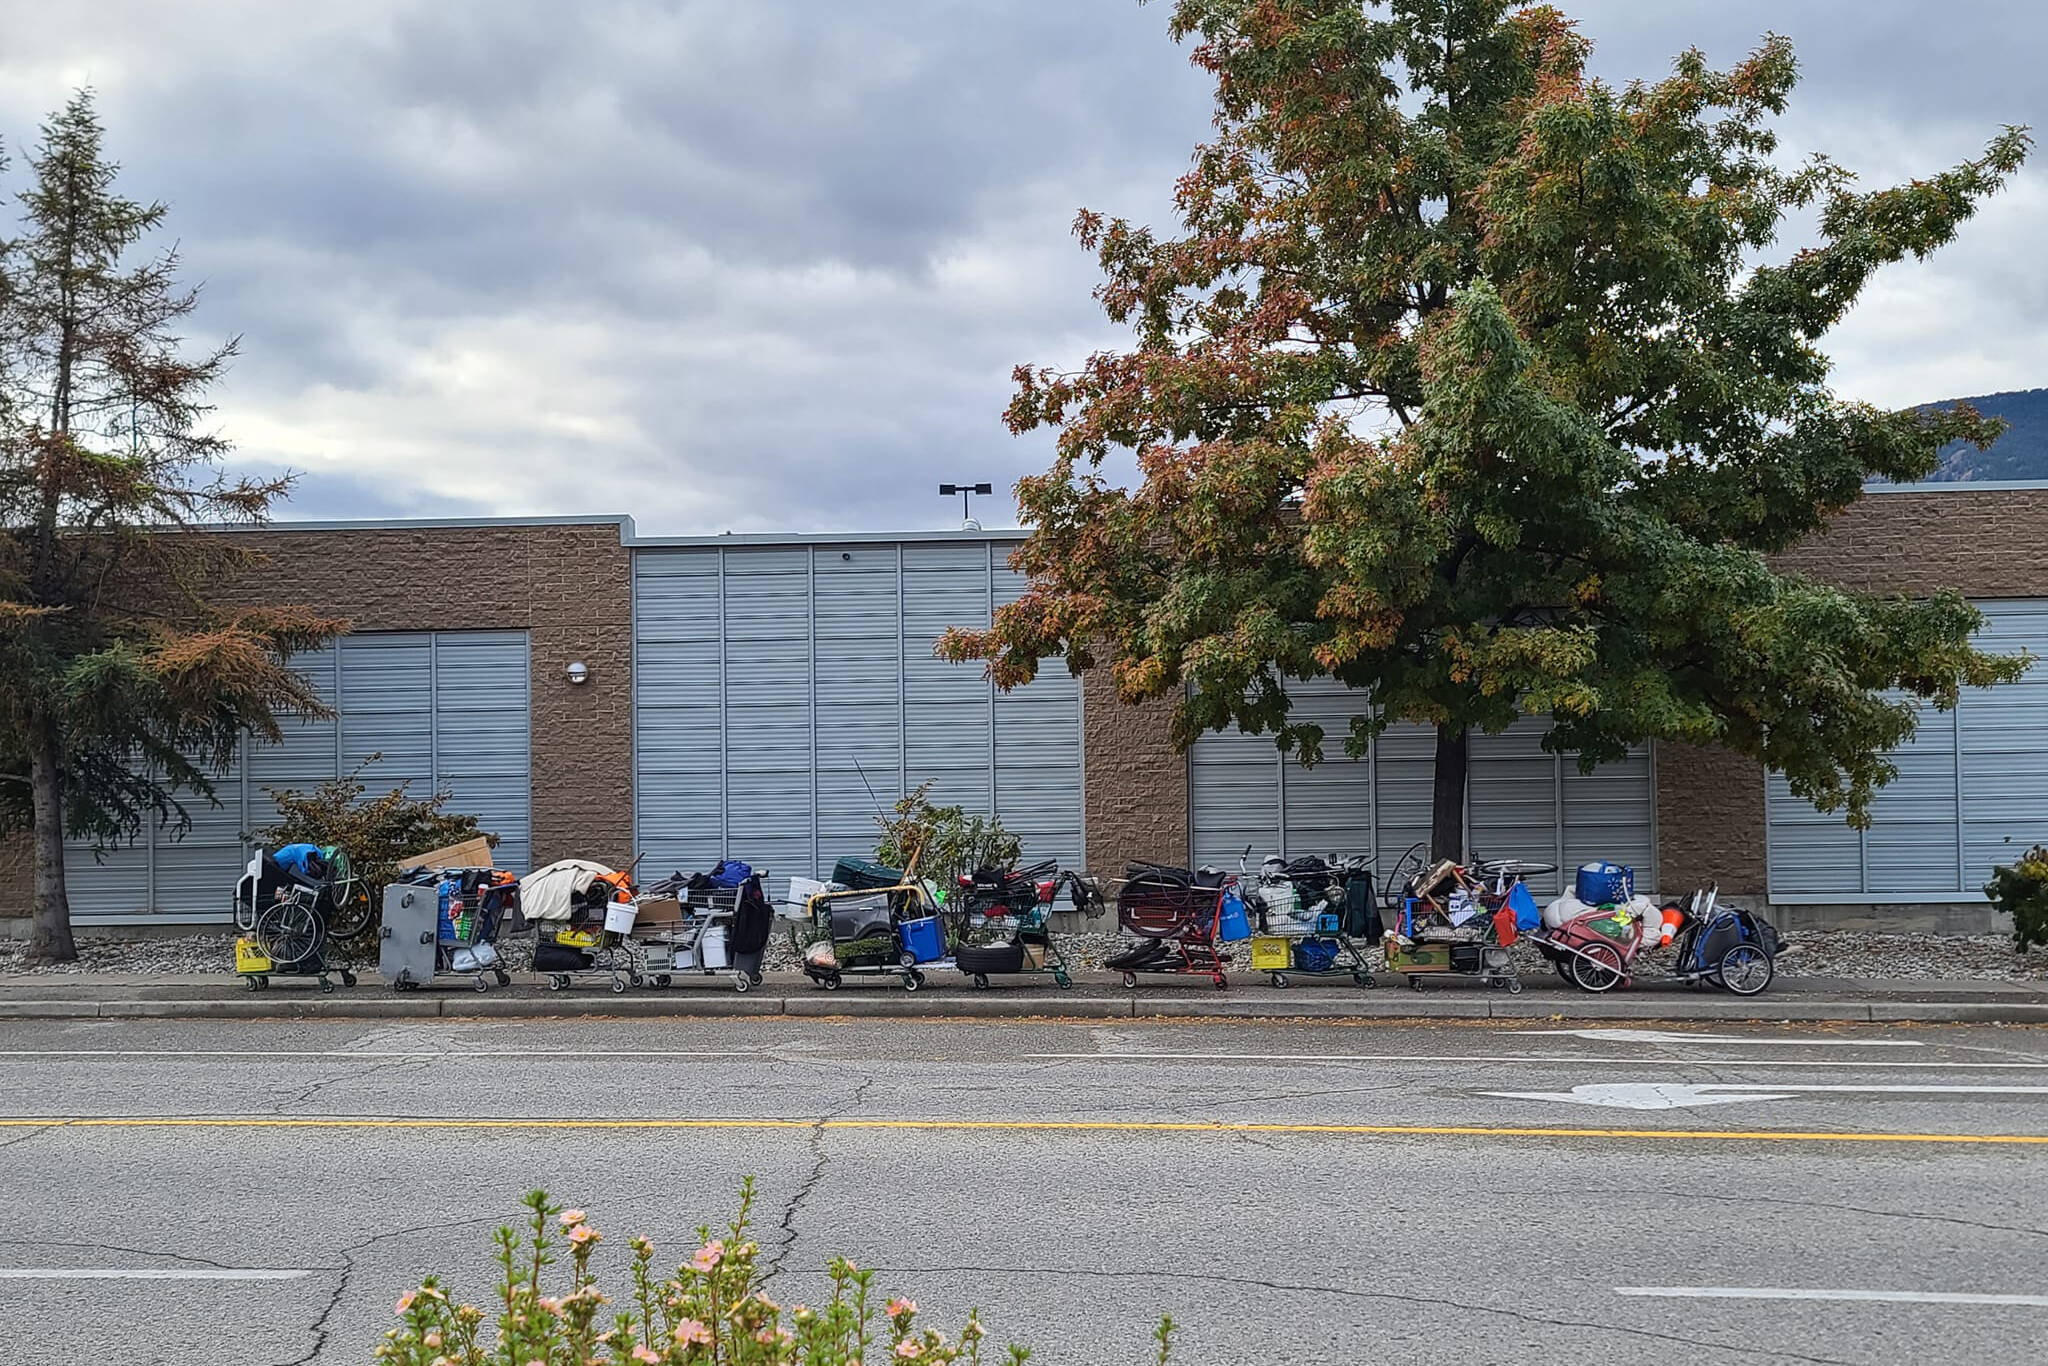 This long train of shopping carts is a regular sight around Penticton. (Facebook)